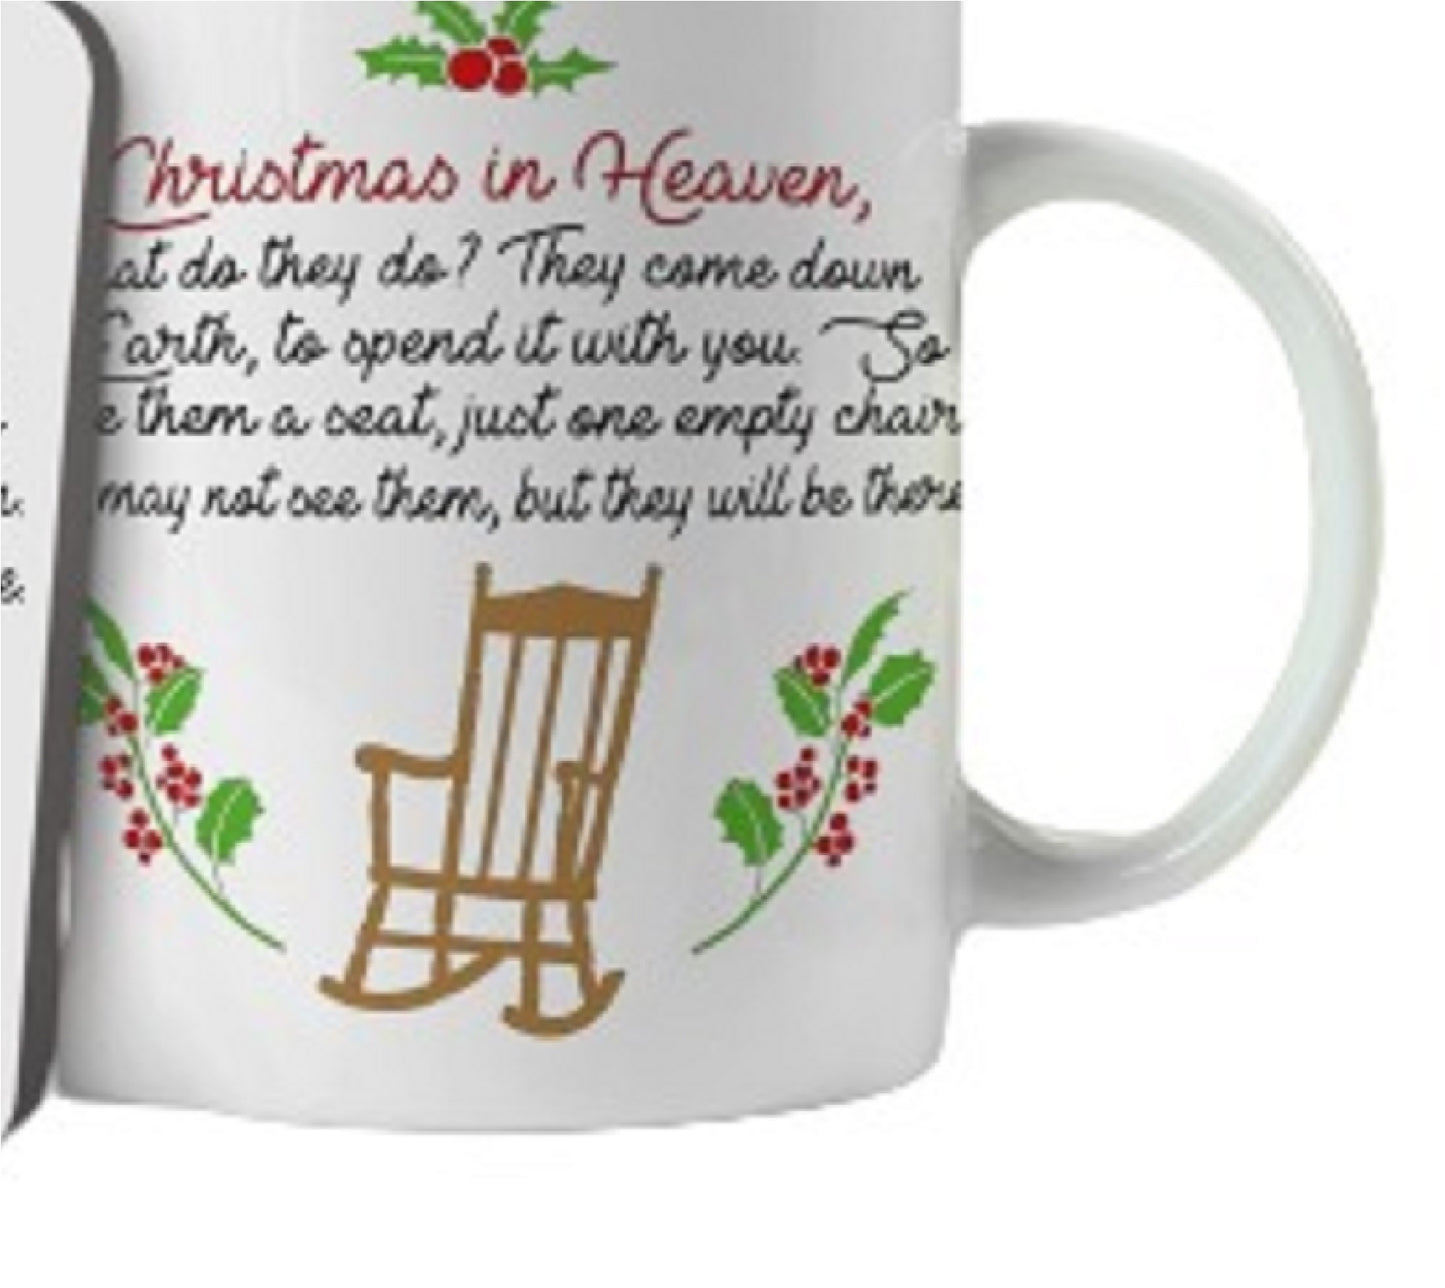  Christmas in Heaven Mug and Coaster by Free Spirit Accessories sold by Free Spirit Accessories